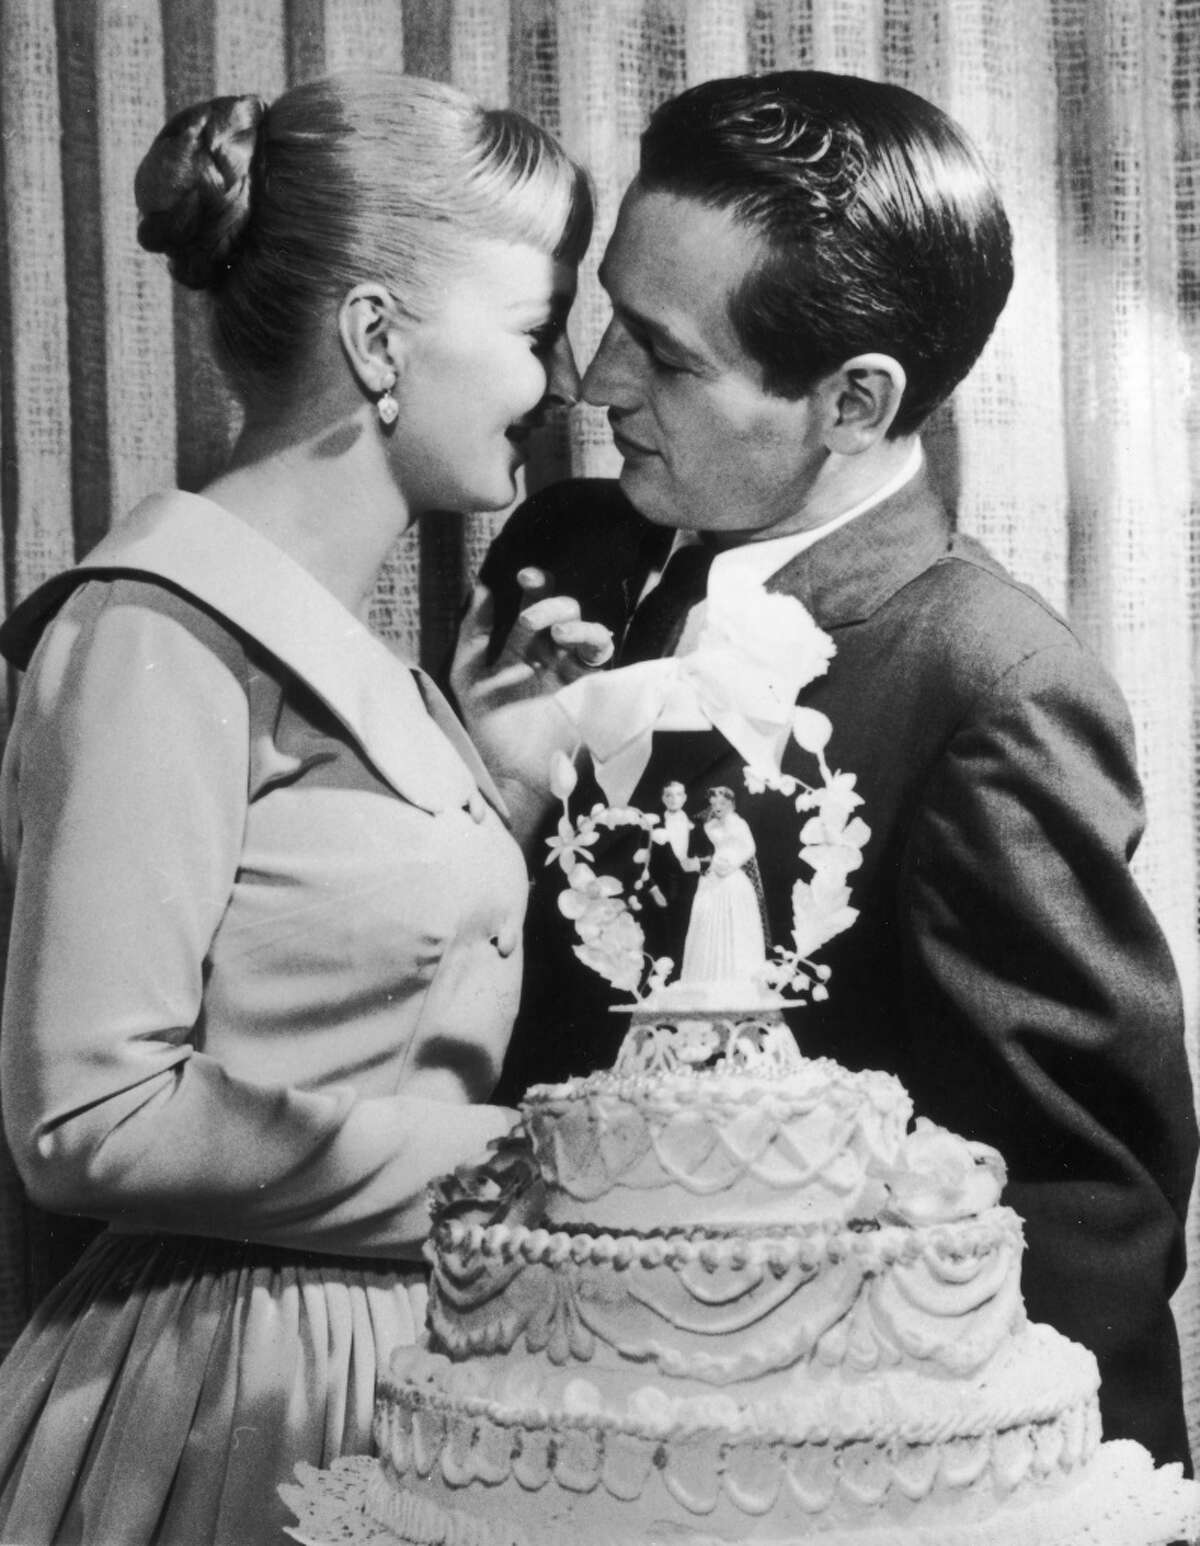 American actors and newlyweds Paul Newman and Joanne Woodward kiss behind a wedding cake during their wedding reception at the El Rancho hotel-casino, Las Vegas, Nevada, January 29, 1958.